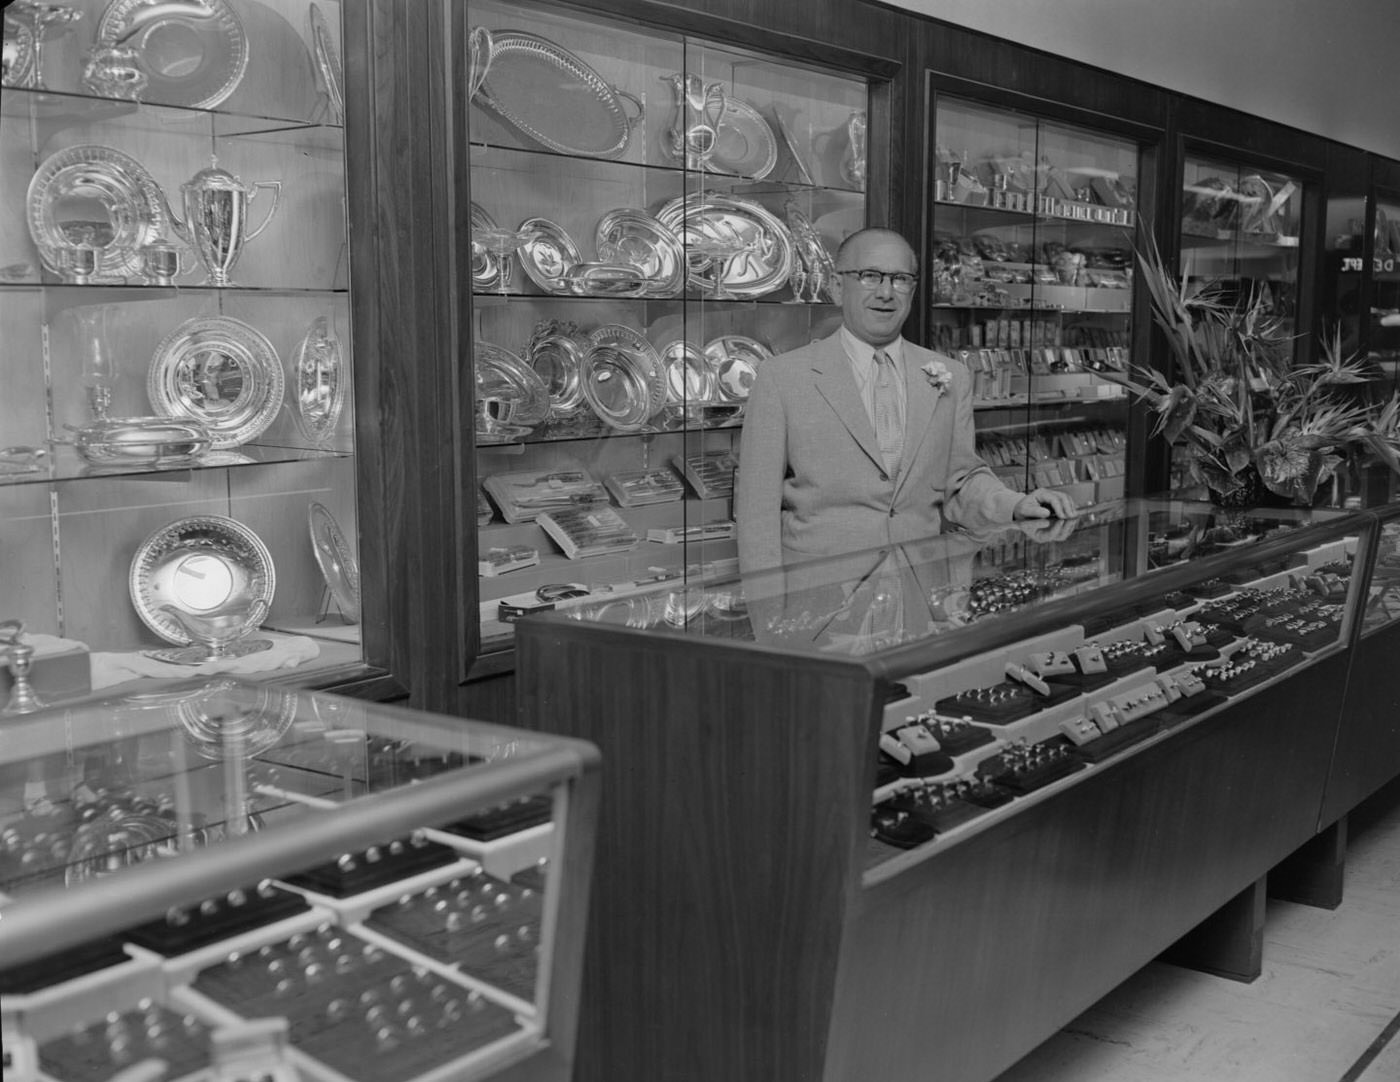 Zales Jewelers with Man Behind Counter, 1953.